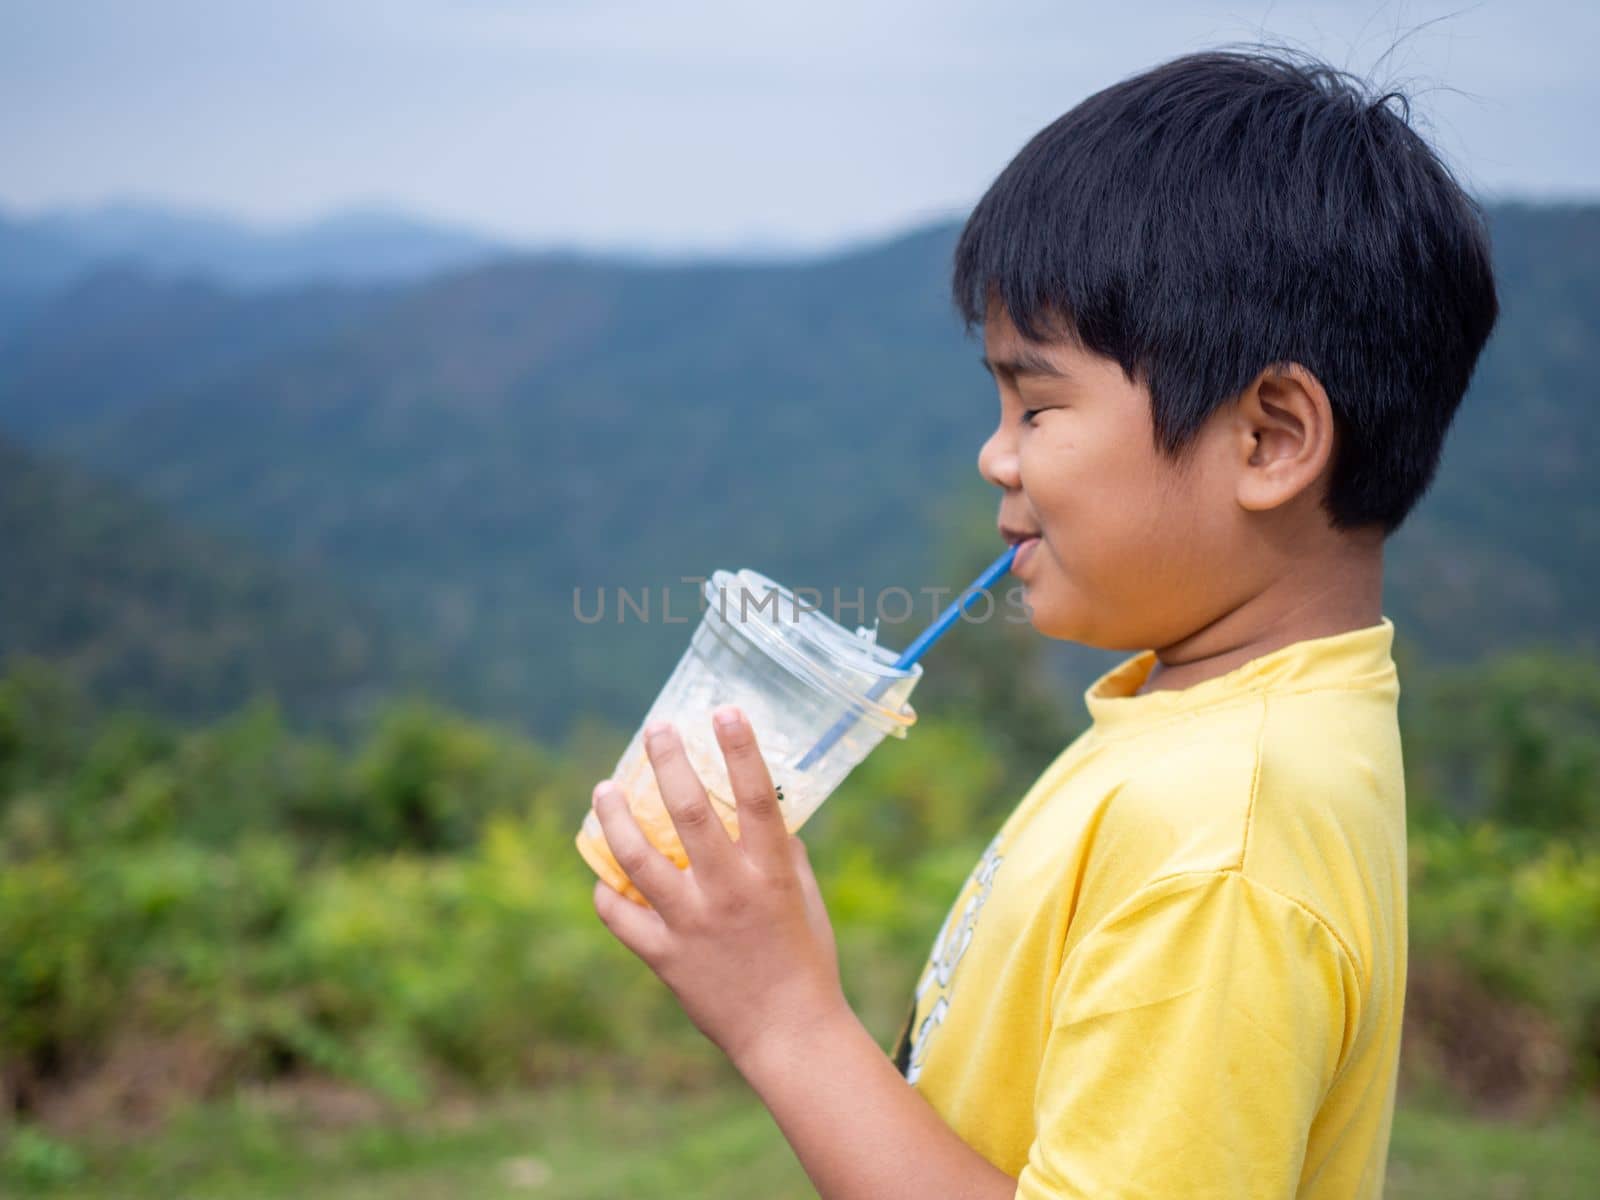 boy sucking a drink from a glass with a valley background